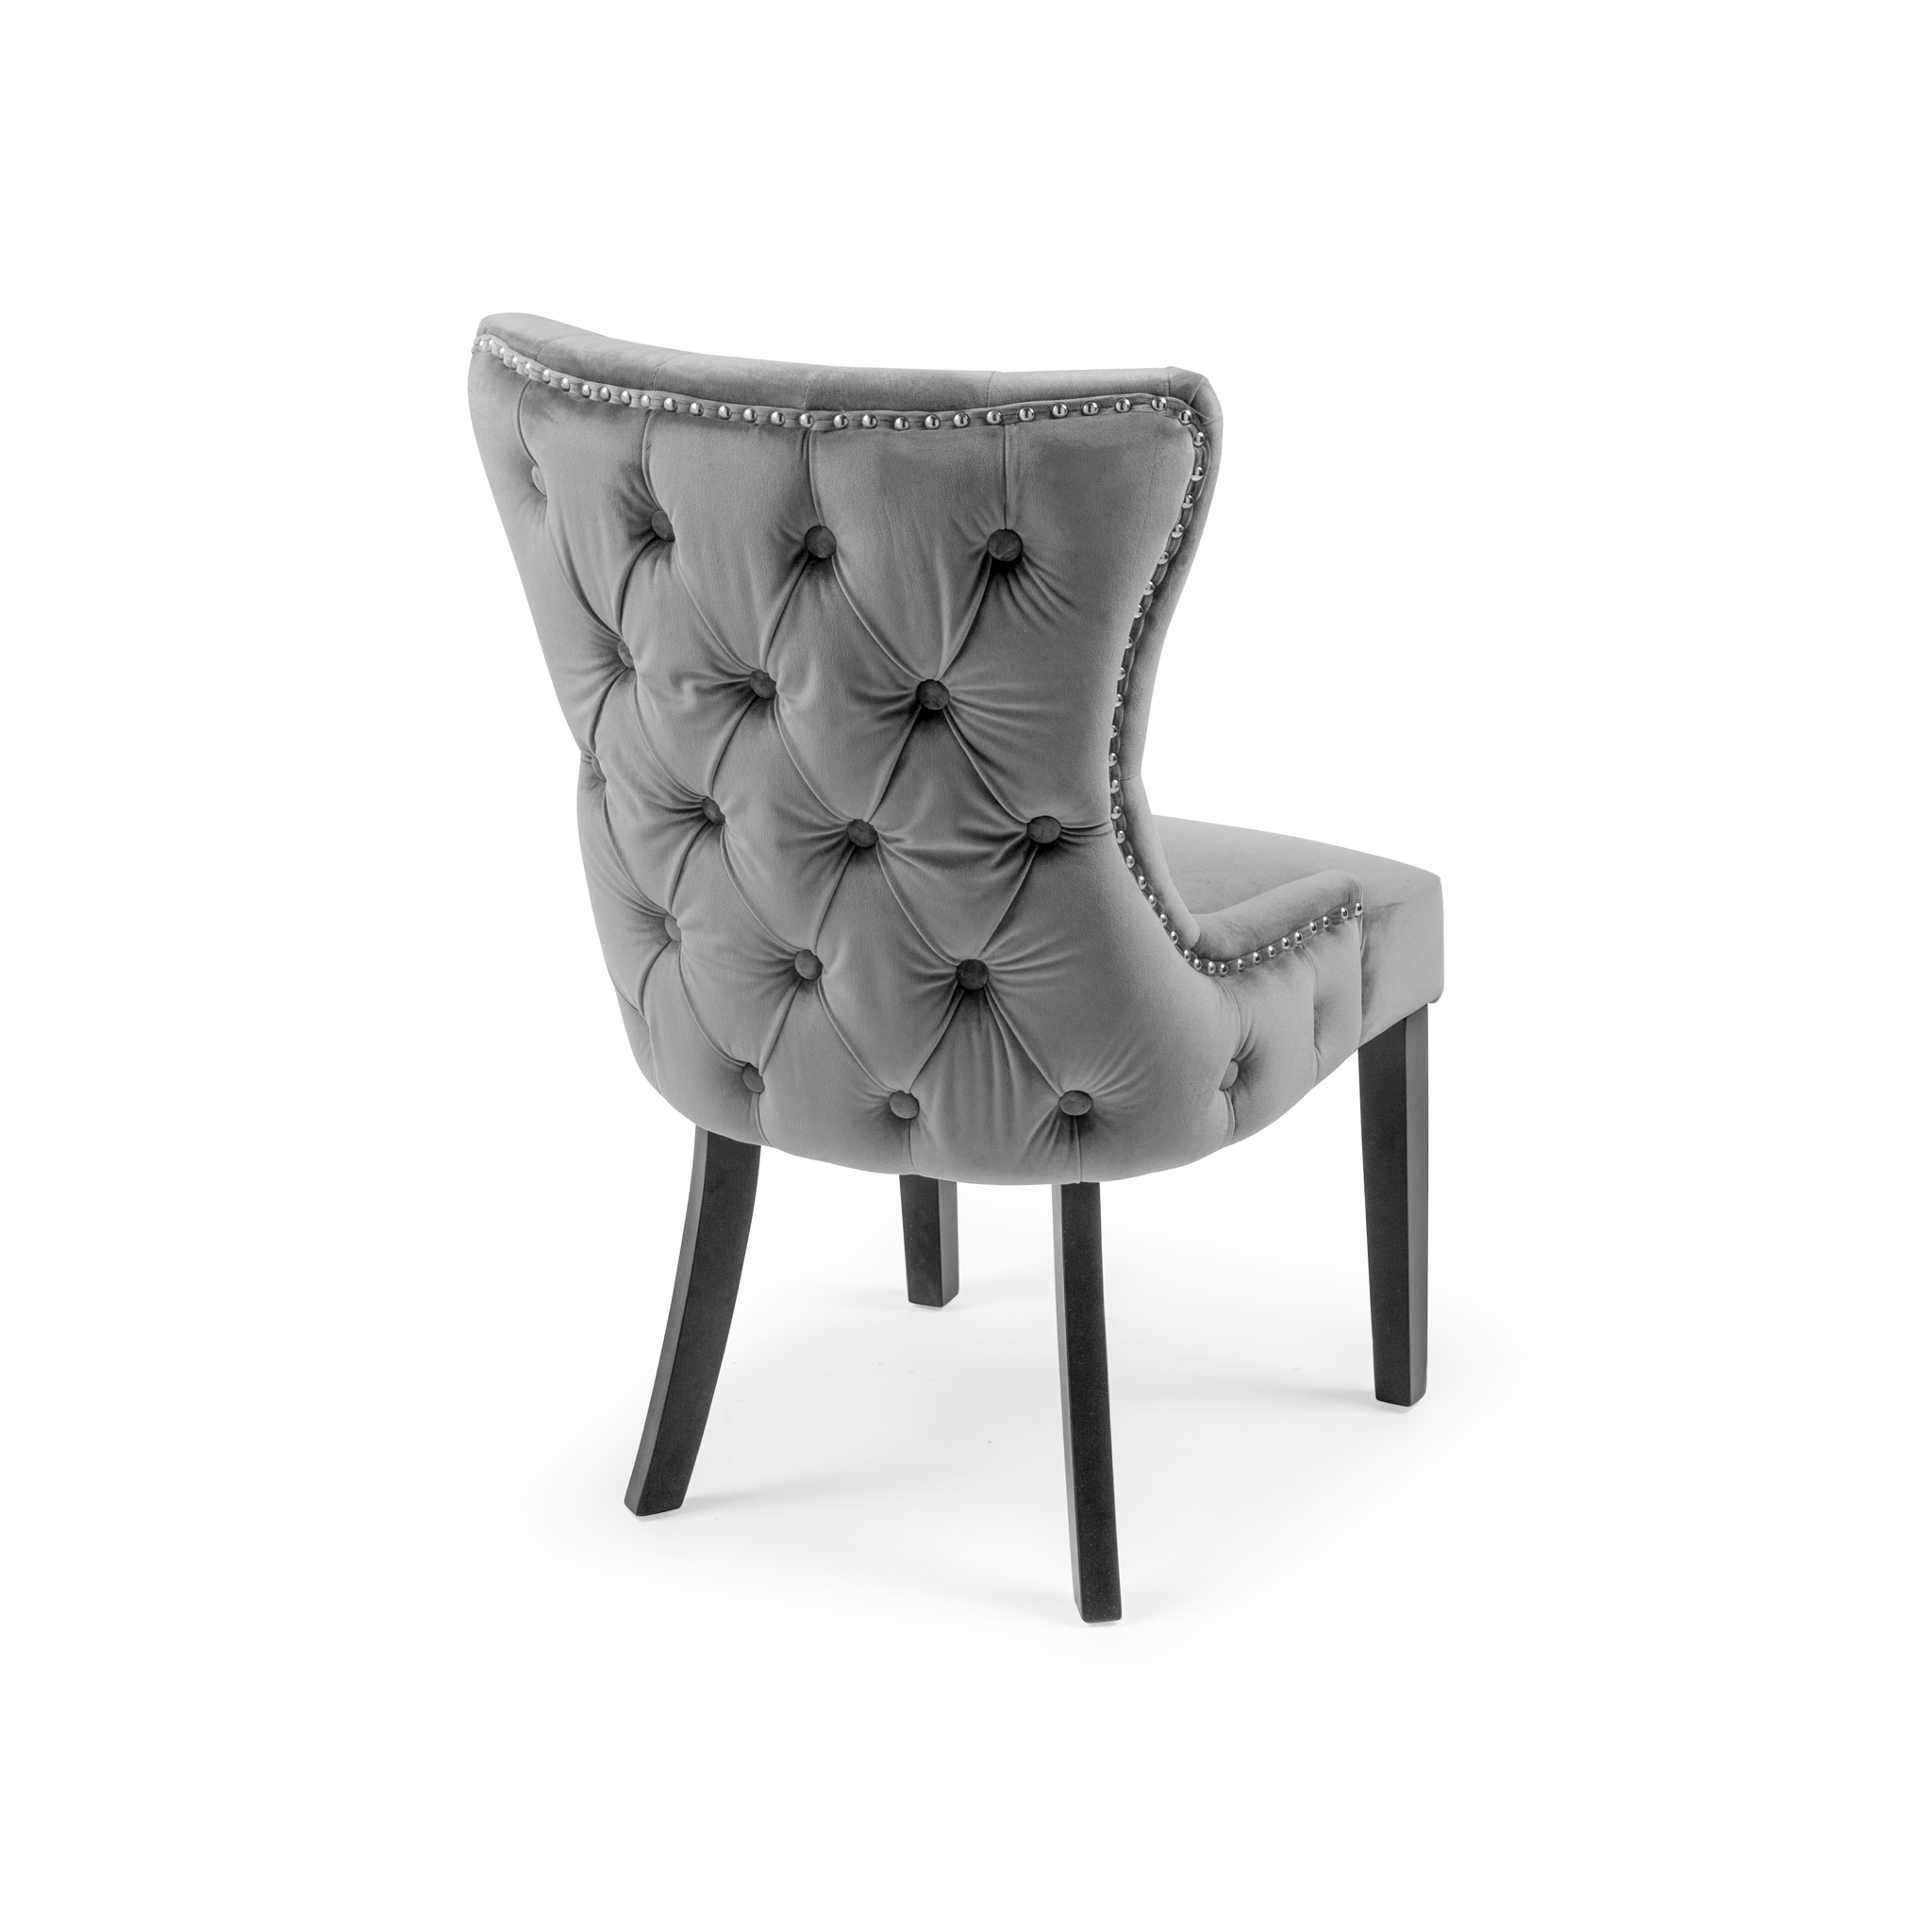 Knightsbridge Grey Velvet Upholstered Dining Room Chair With Button Tufted Detailing – Black Legs